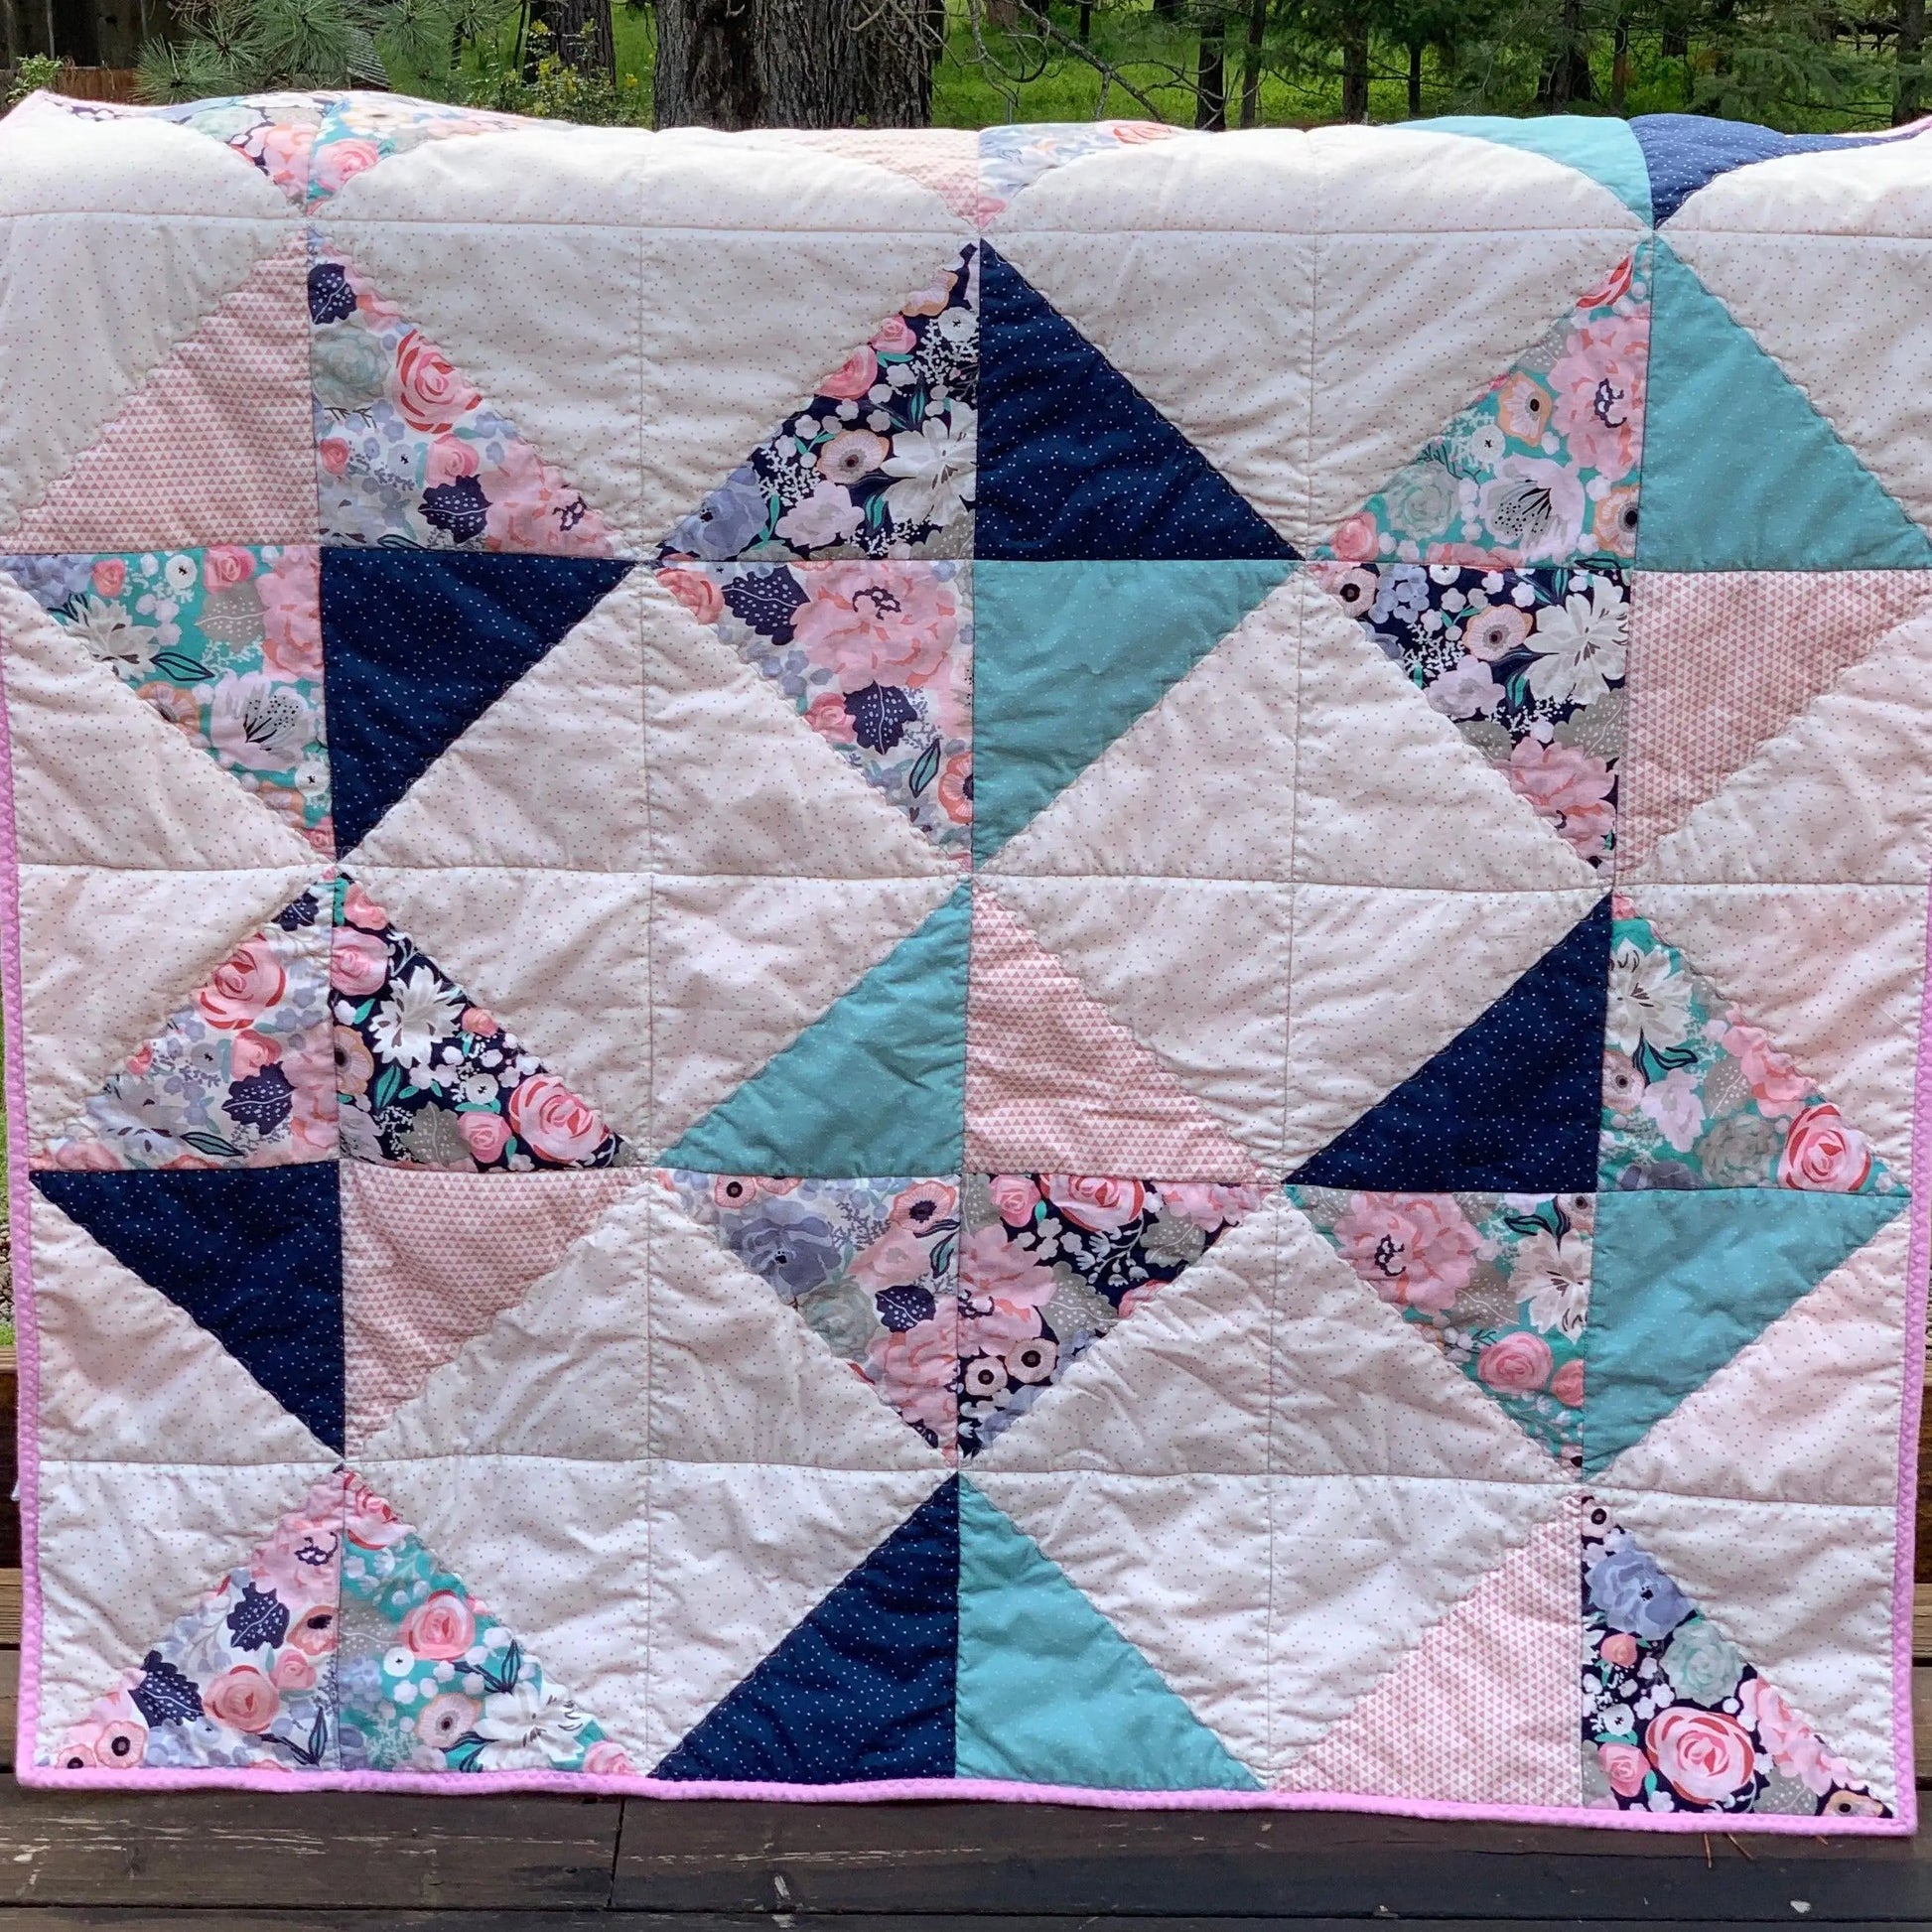 Custom Quilt - Essentially Loved Quilts